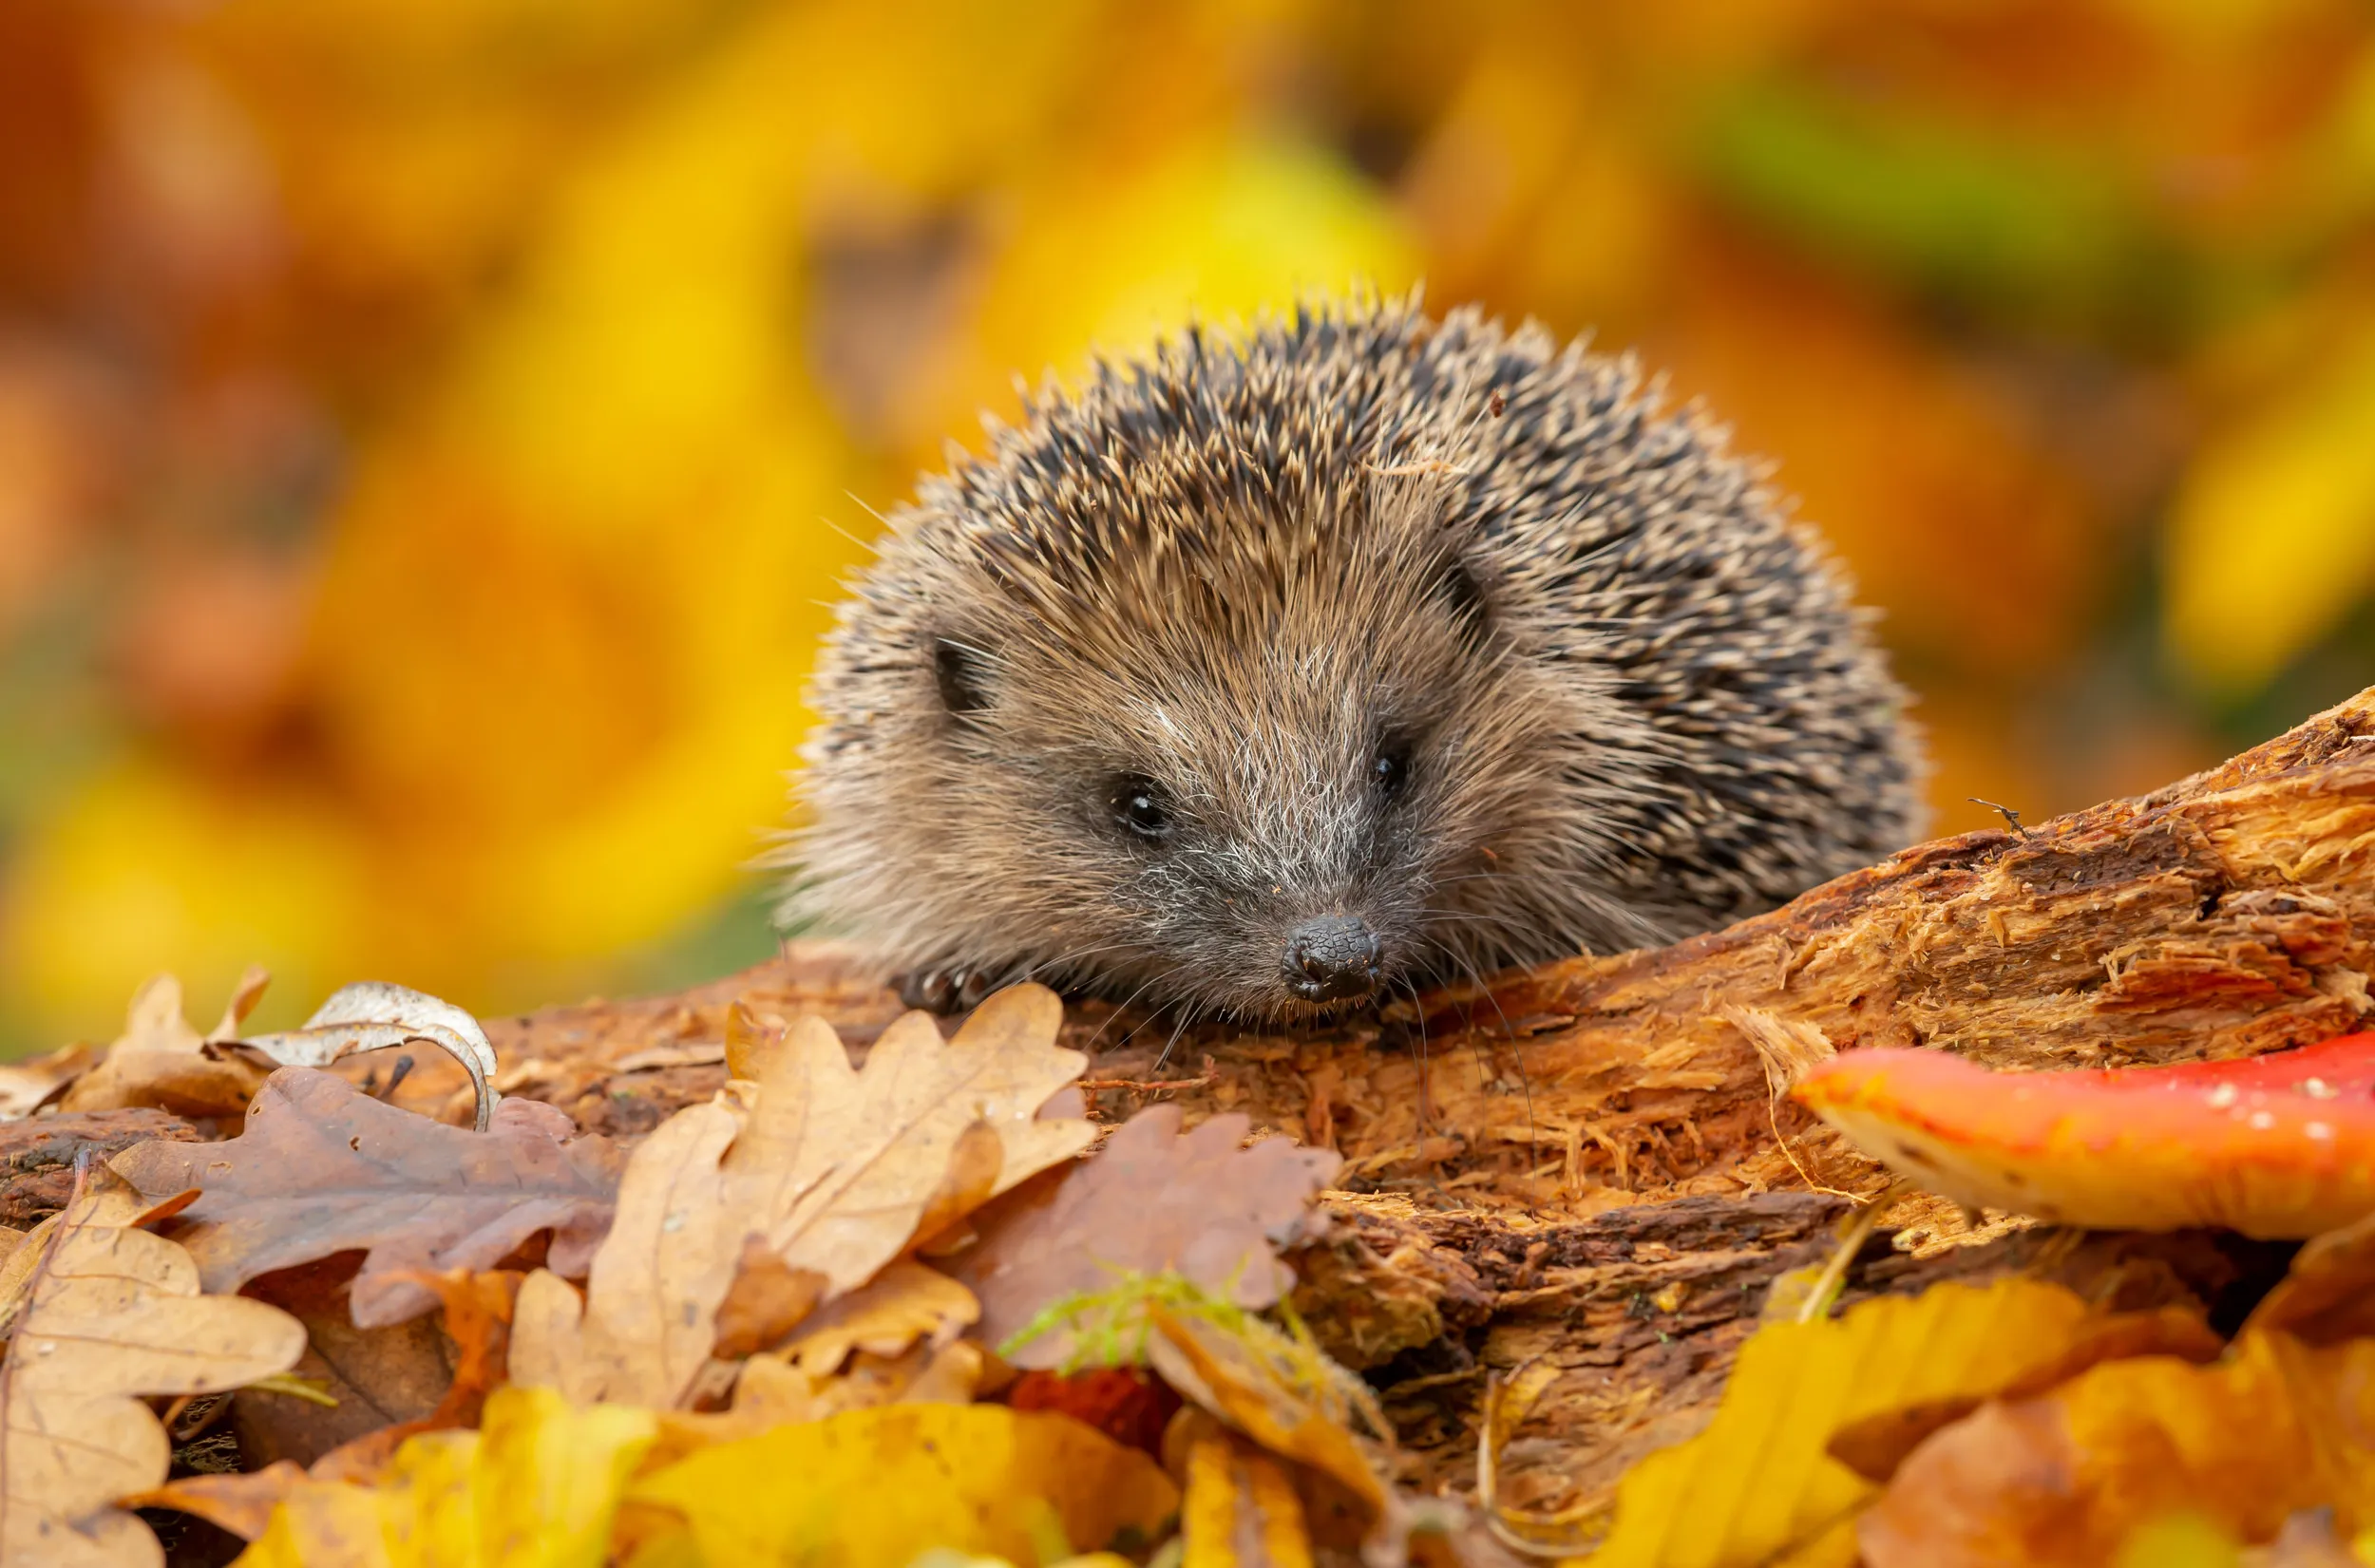 Lone Hedgehog sat on a rotting log, surrounded by golden, fallen leaves.